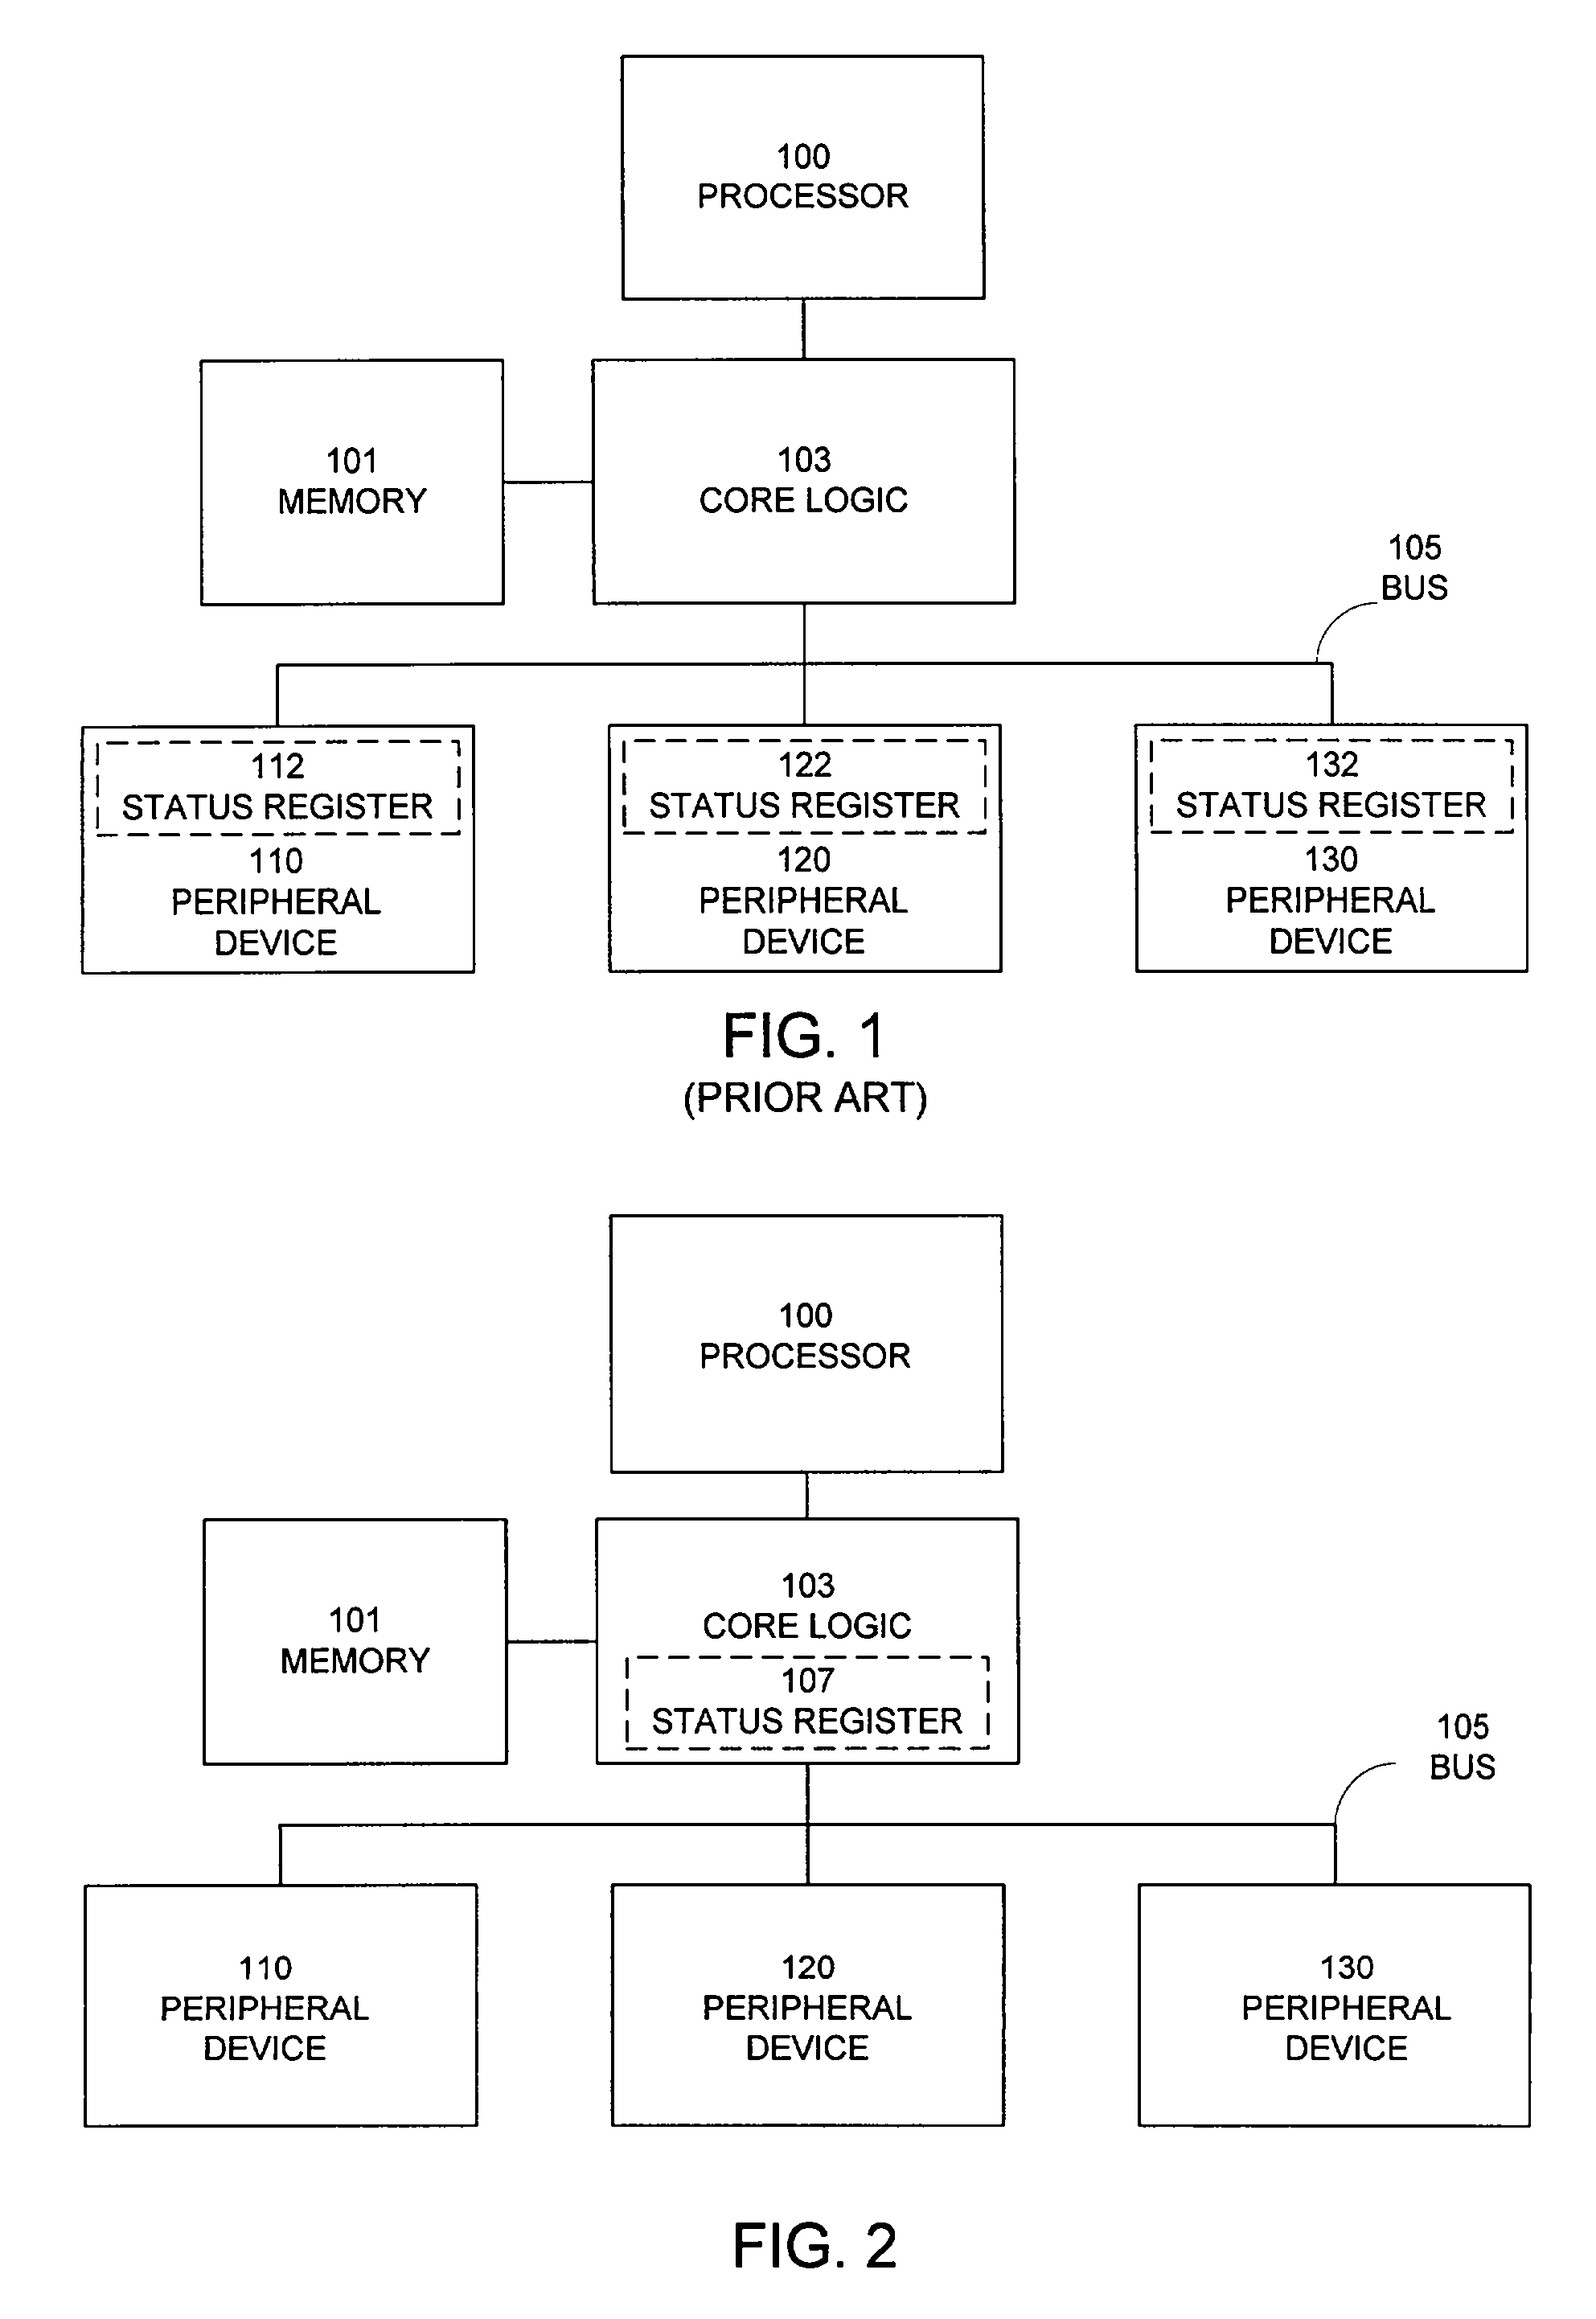 Method for operating core logic unit with internal register for peripheral status